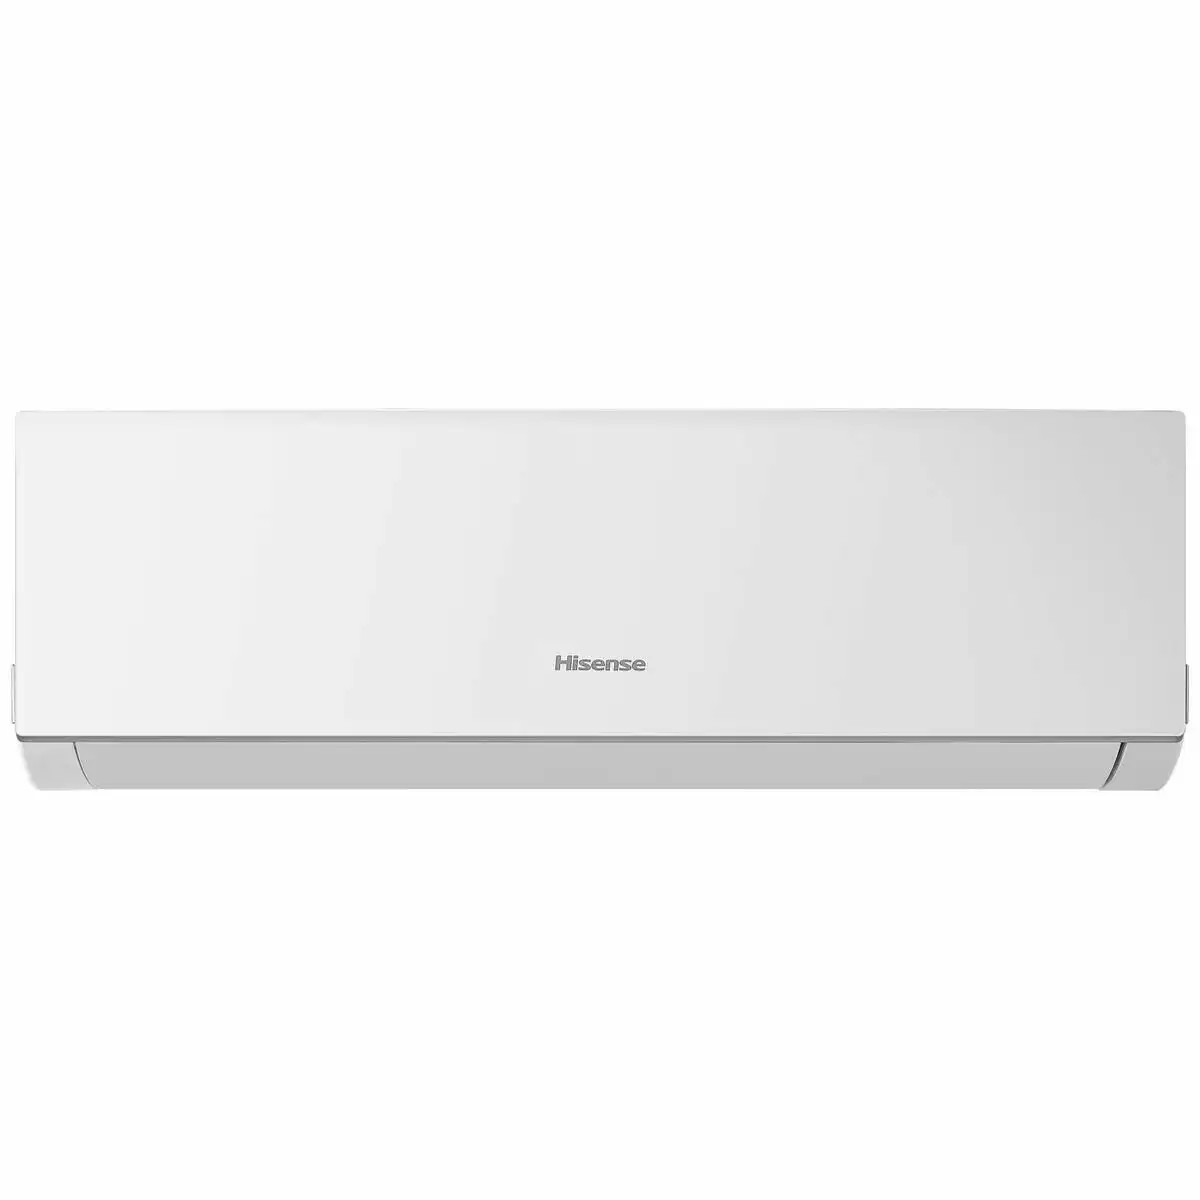 Hisense 5.0kw Reverse Cycle Air Conditioner